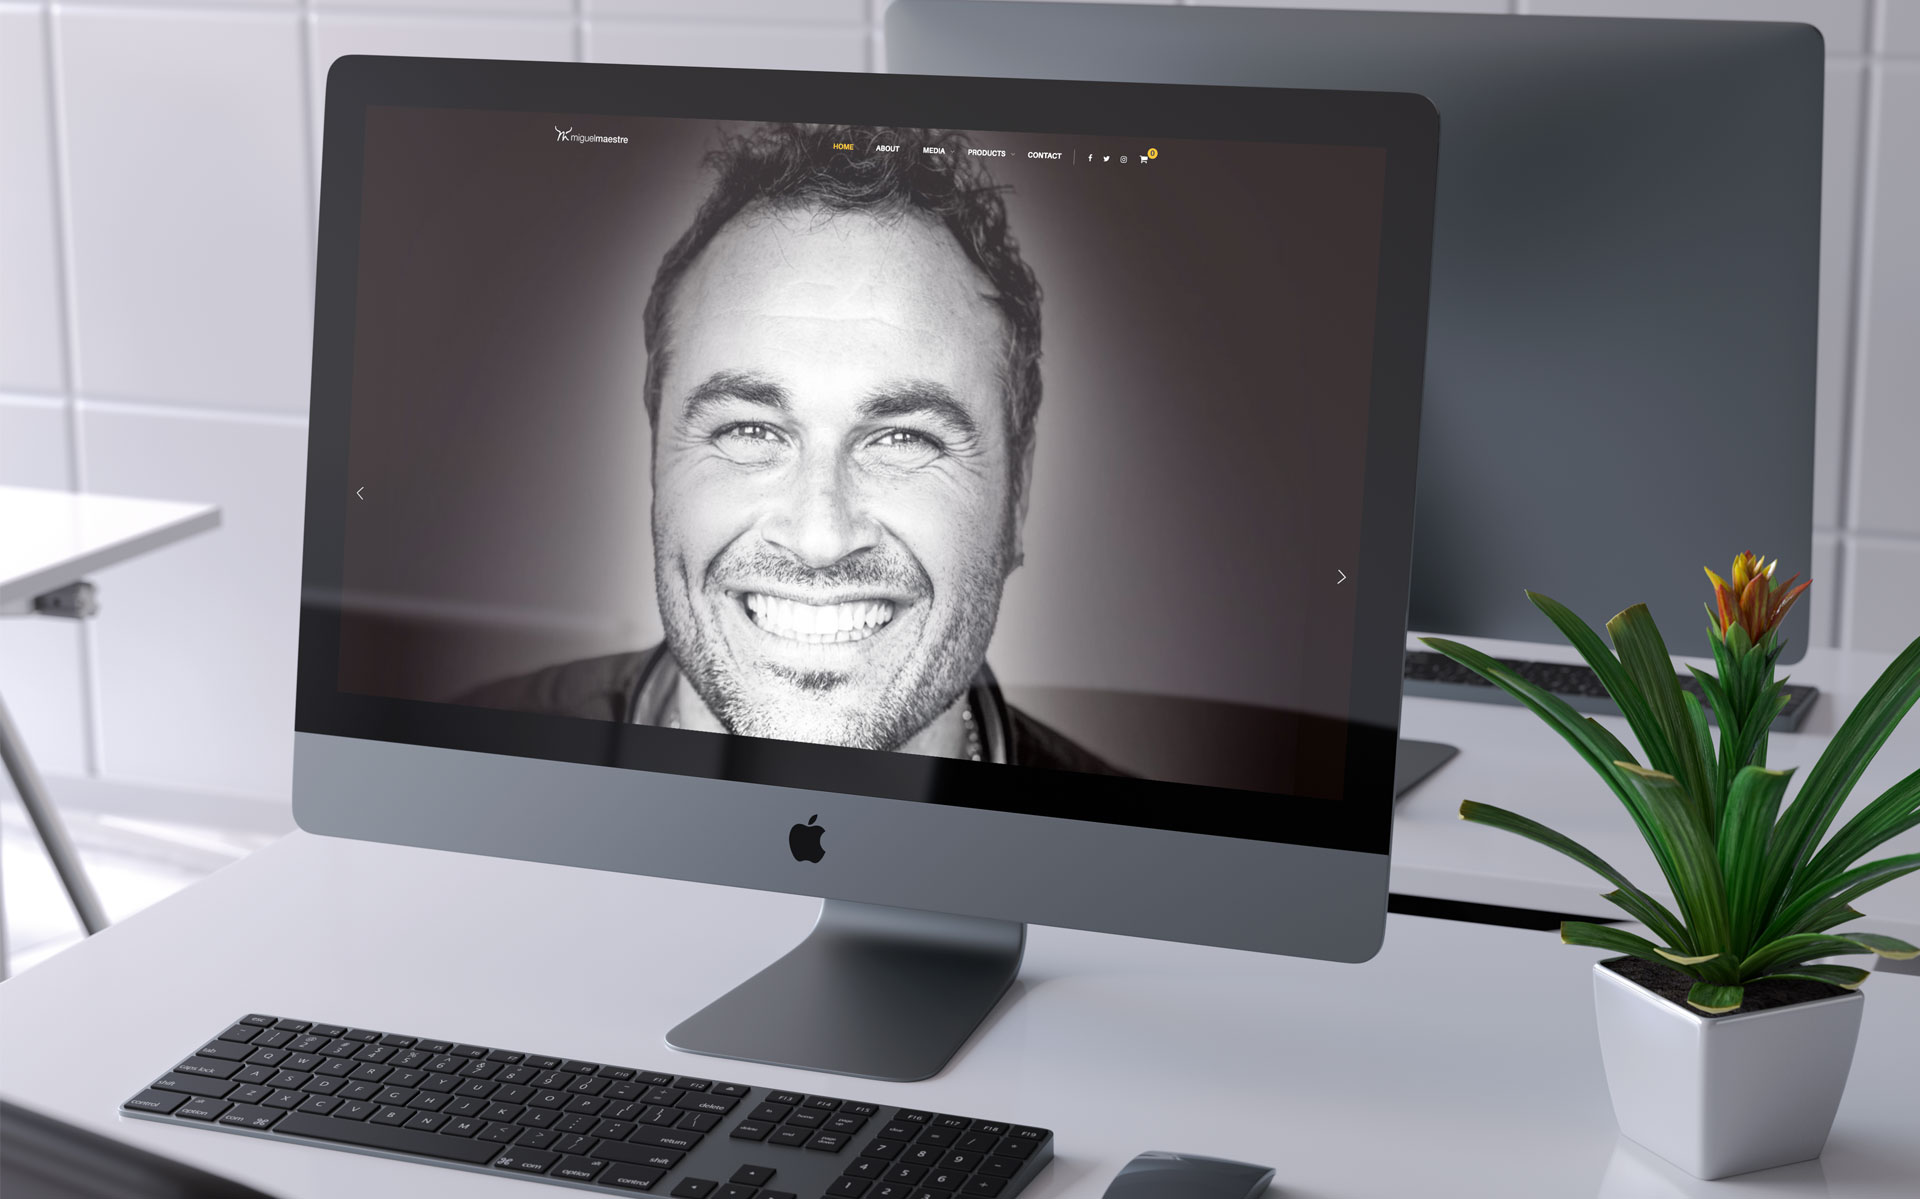 Miguel Maestre logo, branding, marketing & website design & build by Amy at Yellow Sunday